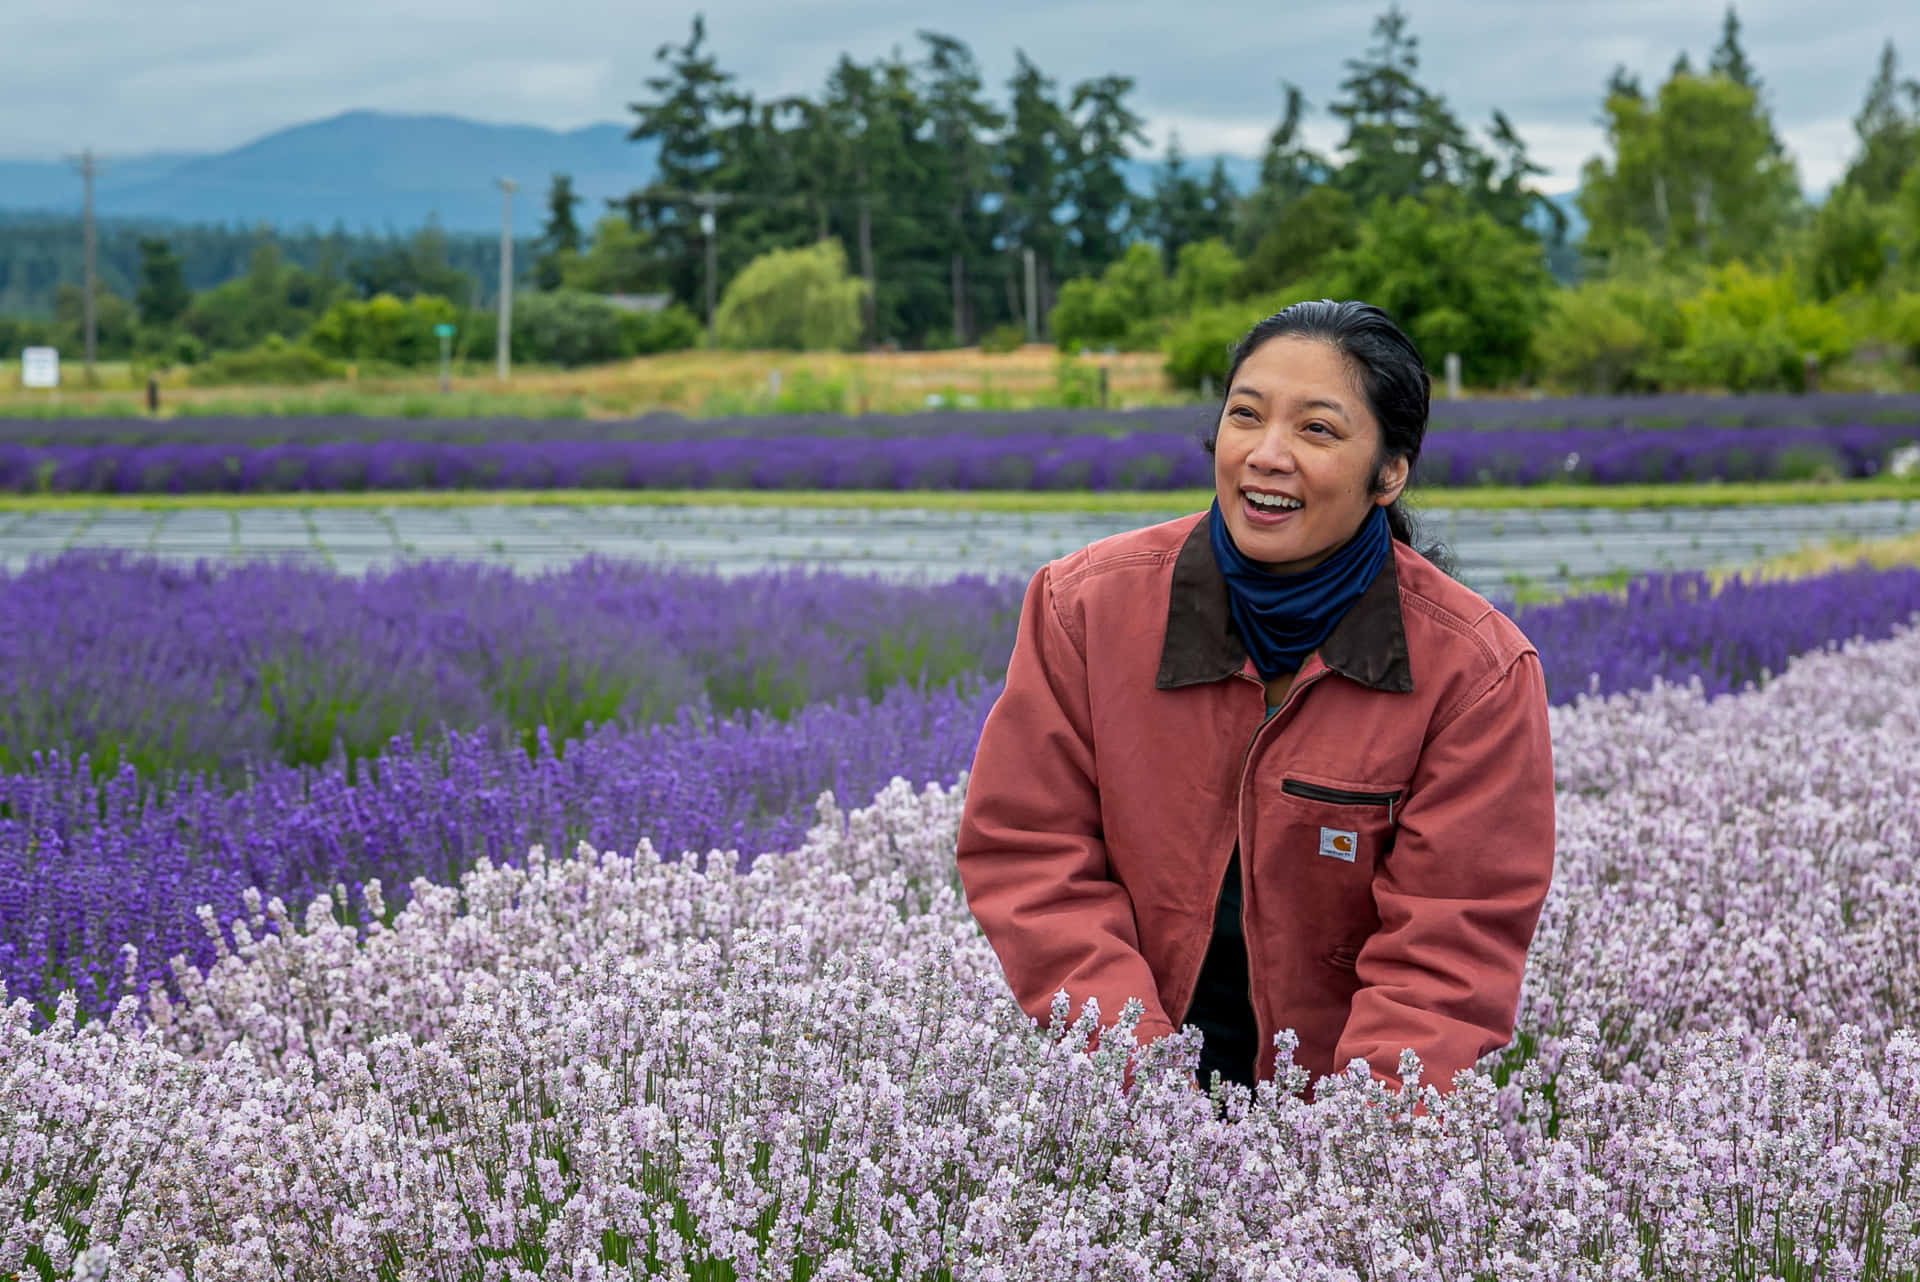 A Woman In A Lavender Field Smiling